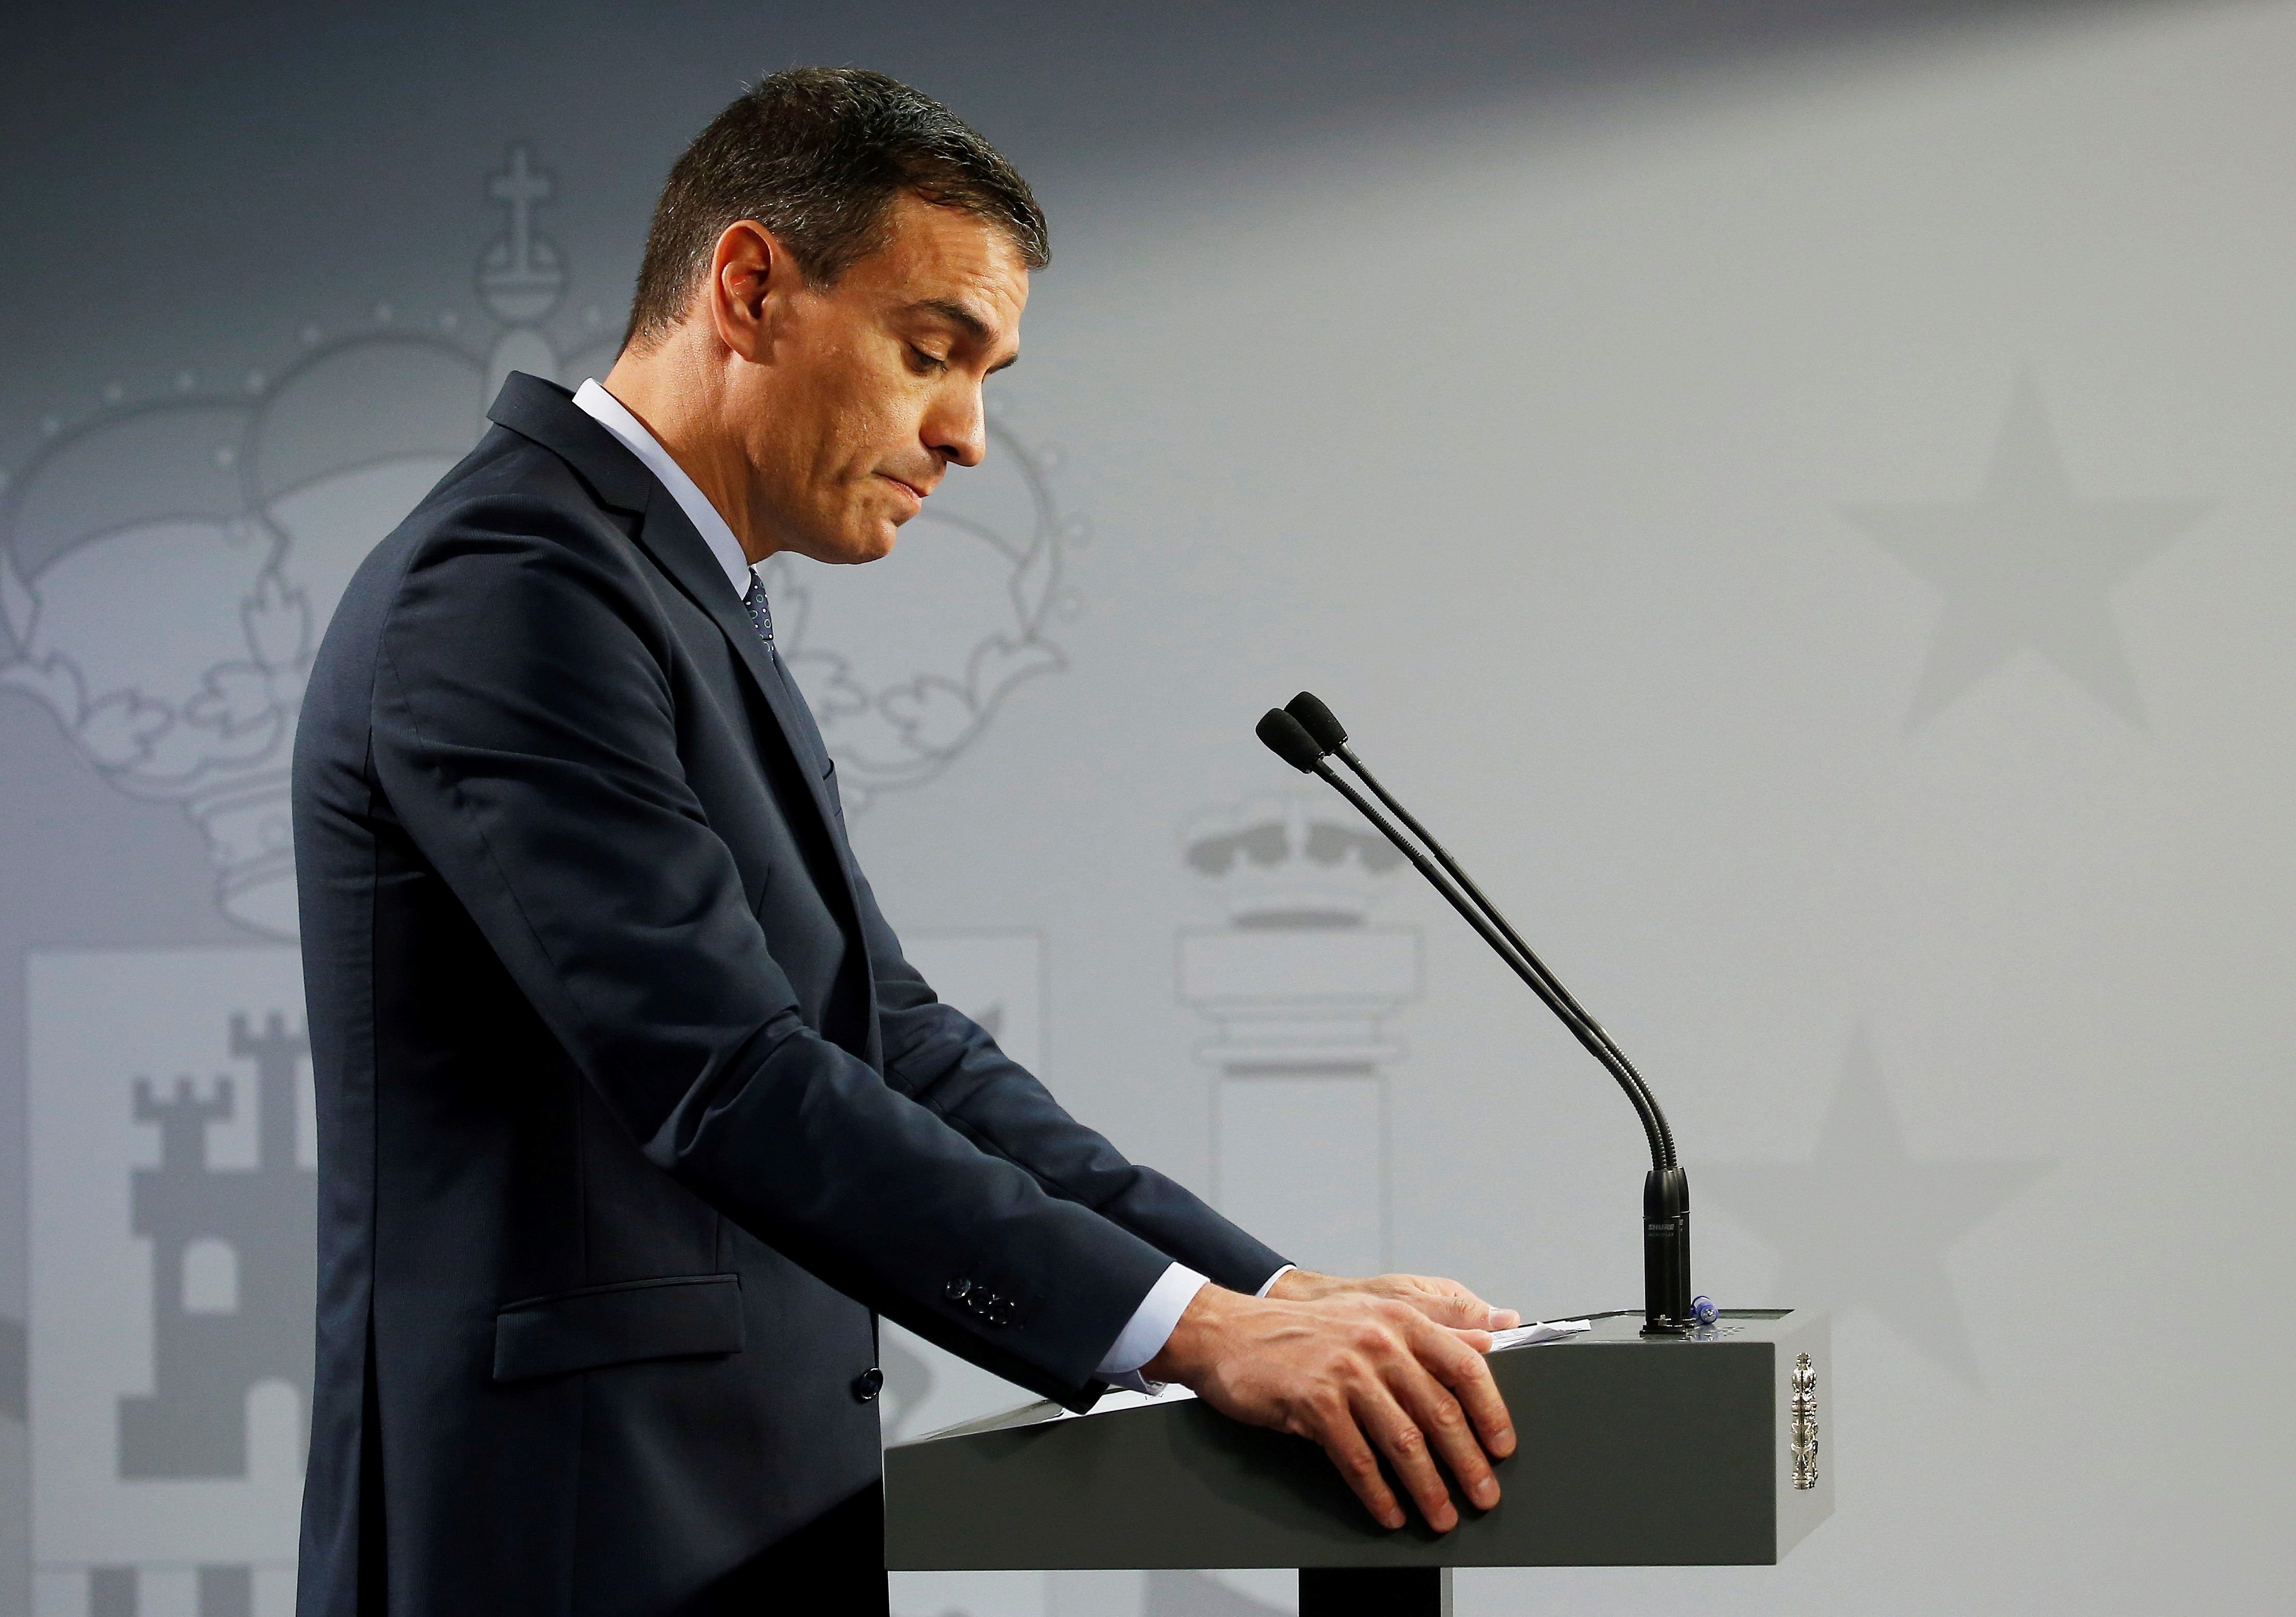 Spanish PM offers "concessions" to opposition after EU warning on judicial reform